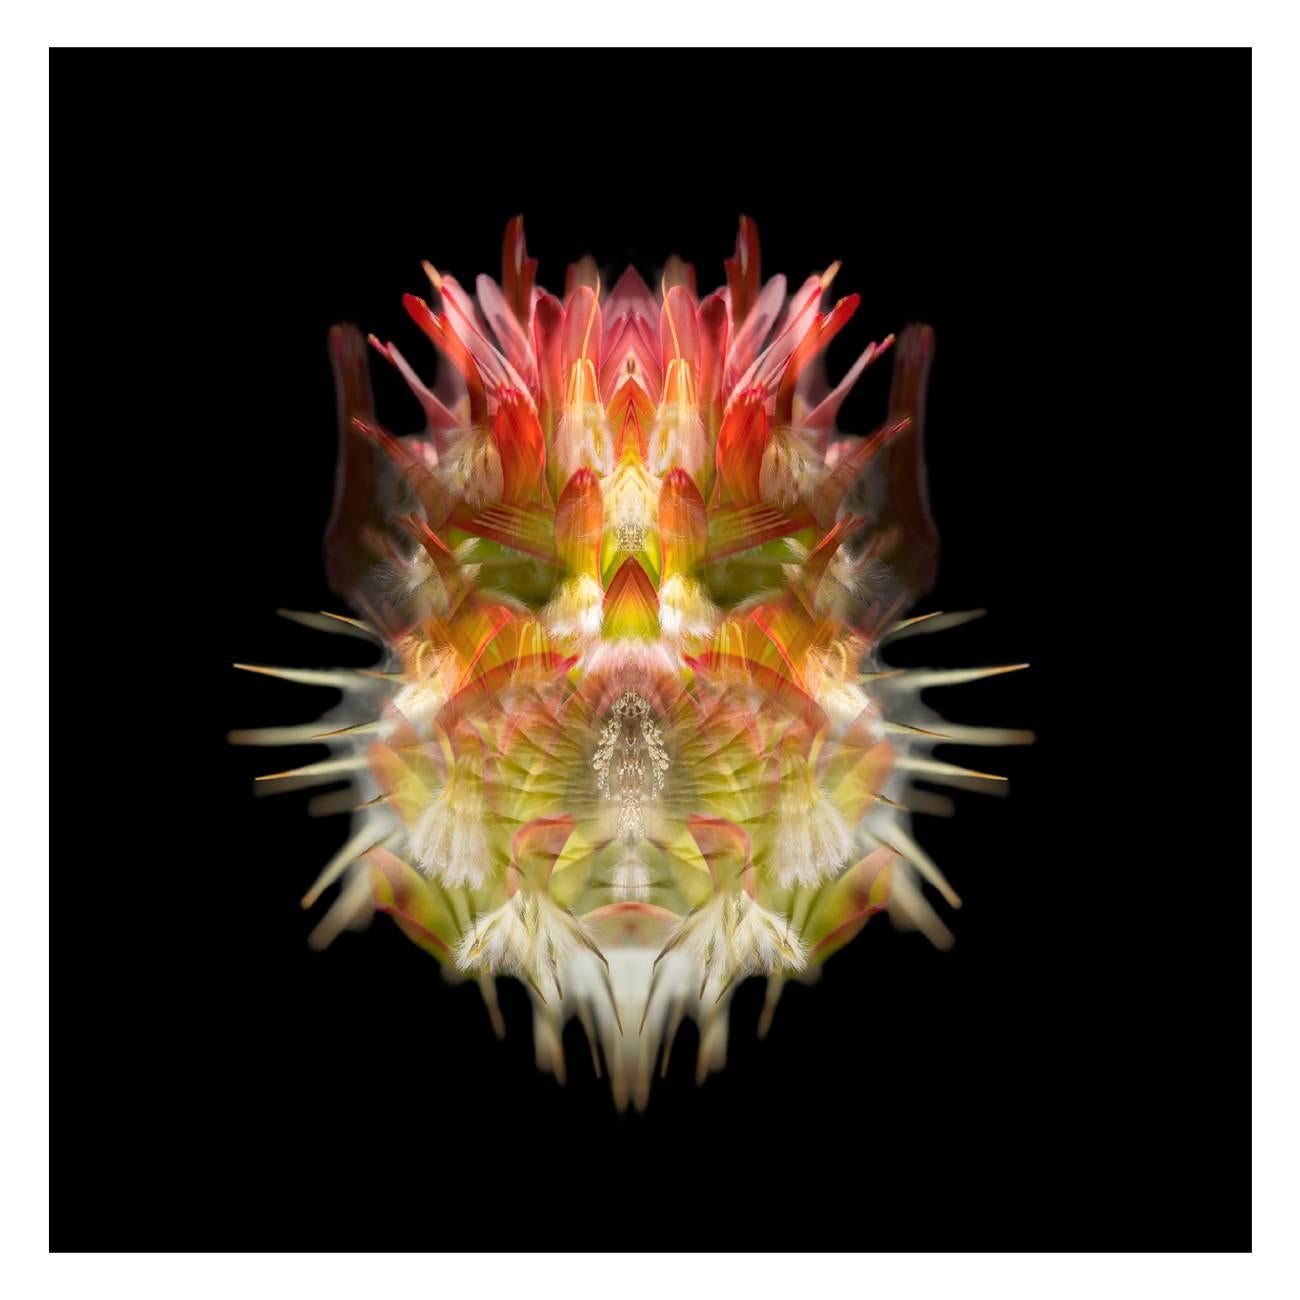 Composition: 
Red Pagoda flower (Protea Mimetes),Onopordium  Acanthium (cotton thistle), Anthozoa (soft coral)

Limited edition. Each image is uniquely printed directly to 5mm acrylic glass using UV cured pigment inks giving each photograph real